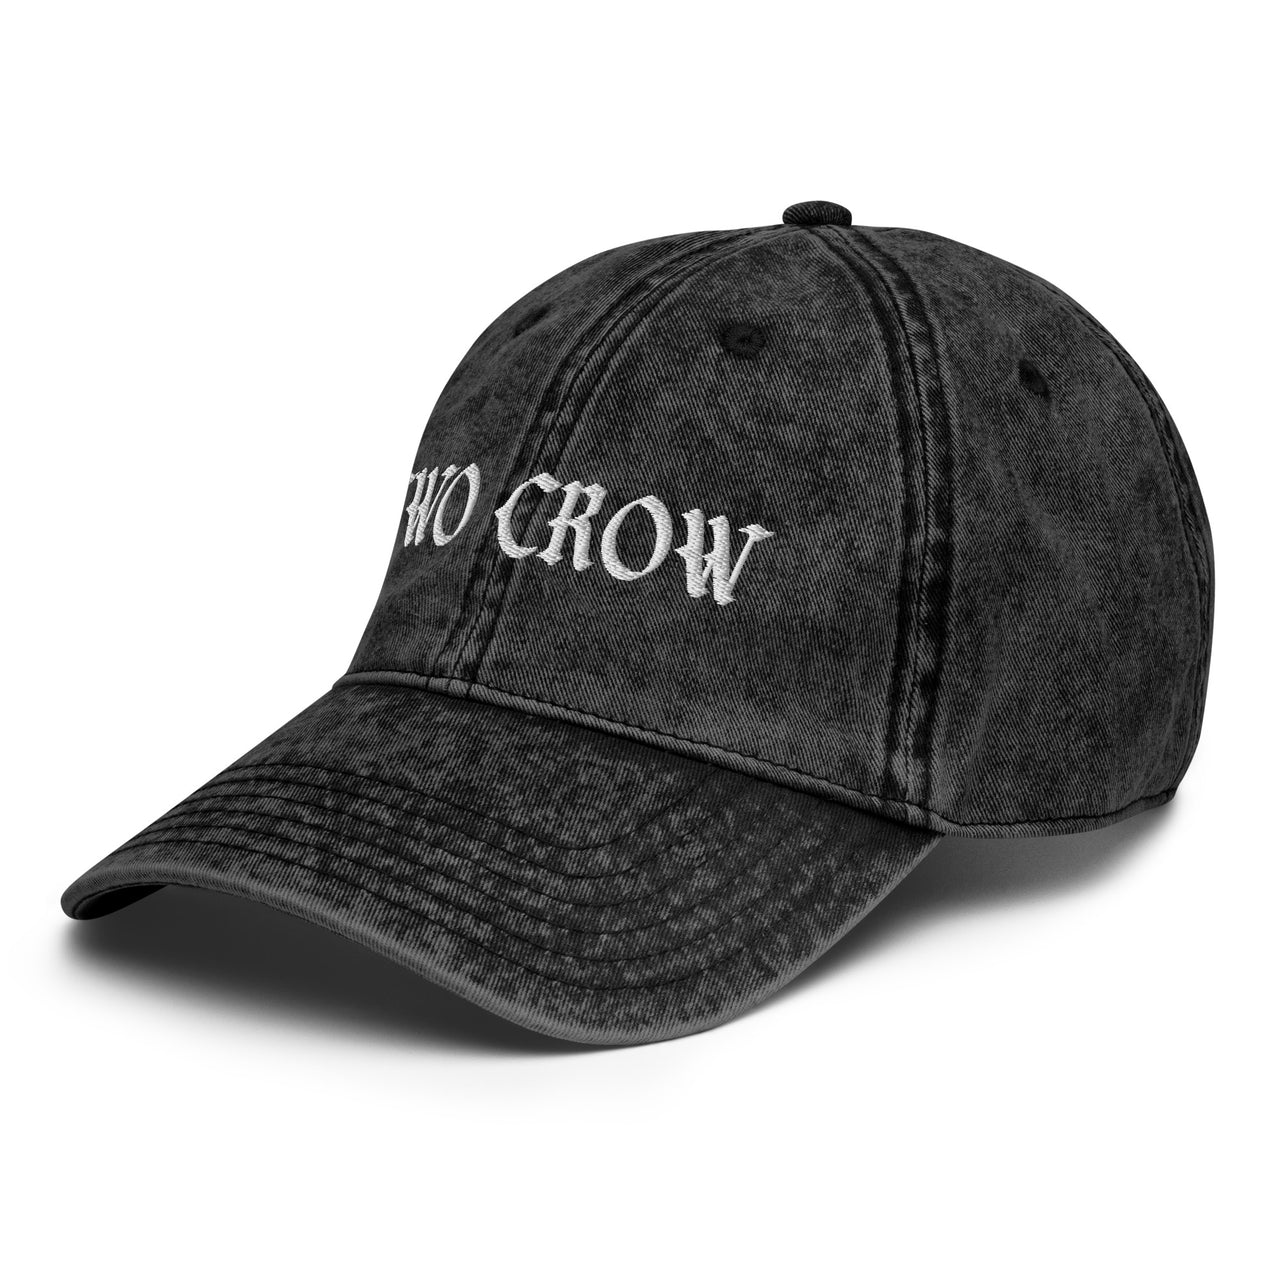 Two Crow Vintage Dad Hat